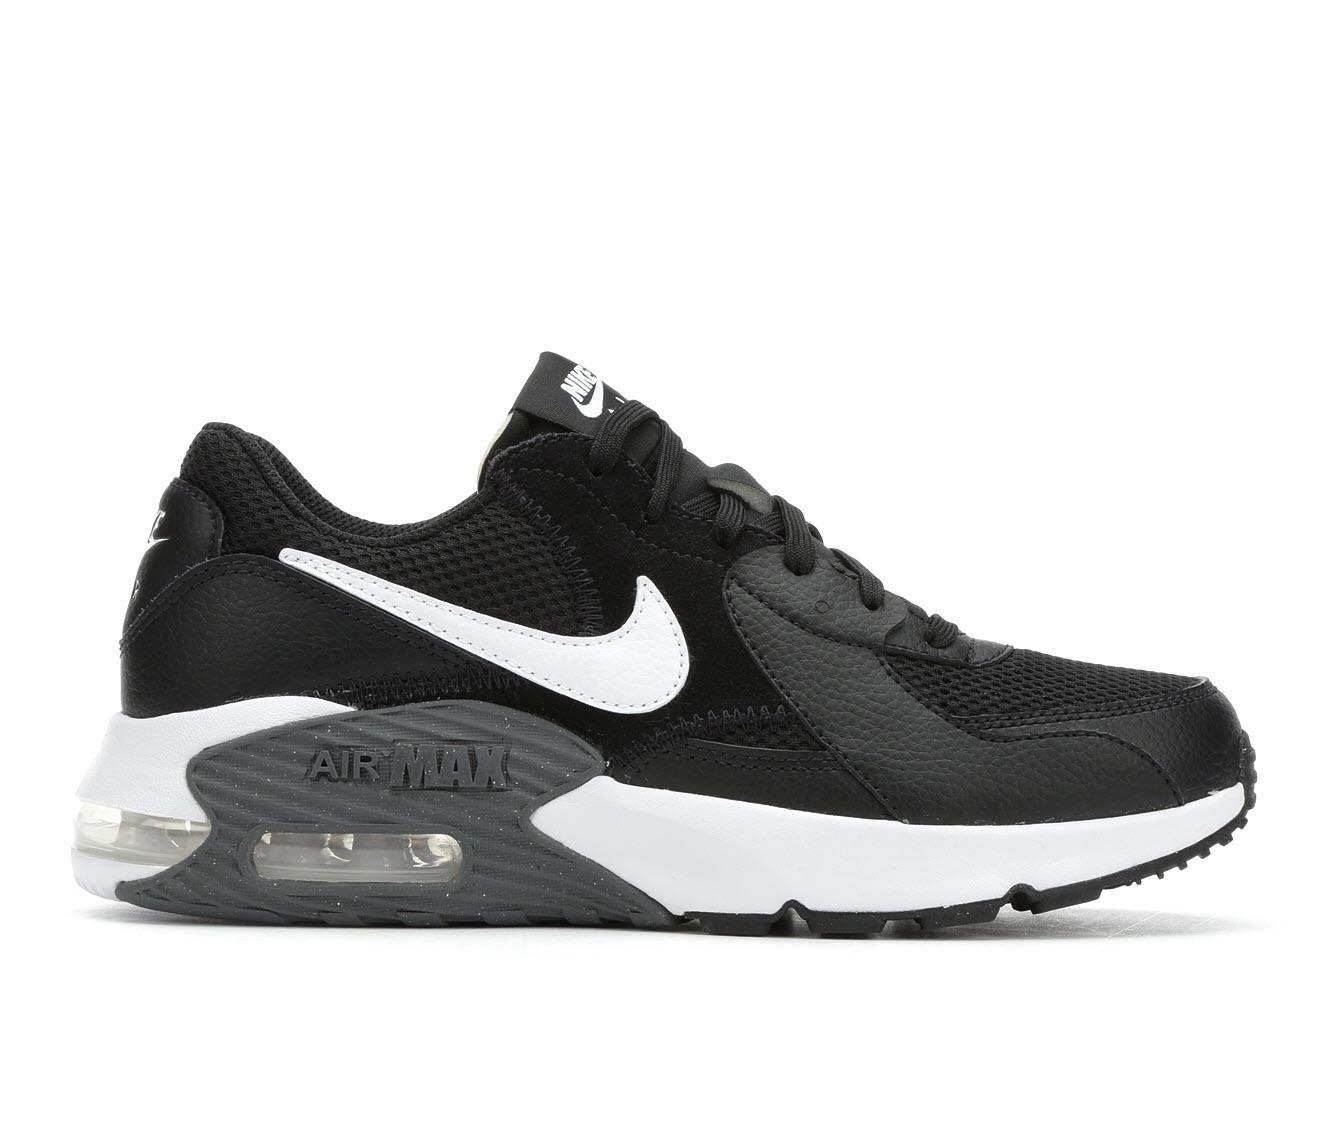 Melodrama Vaag land Women's Nike Air Max Excee Sneakers | Shoe Carnival